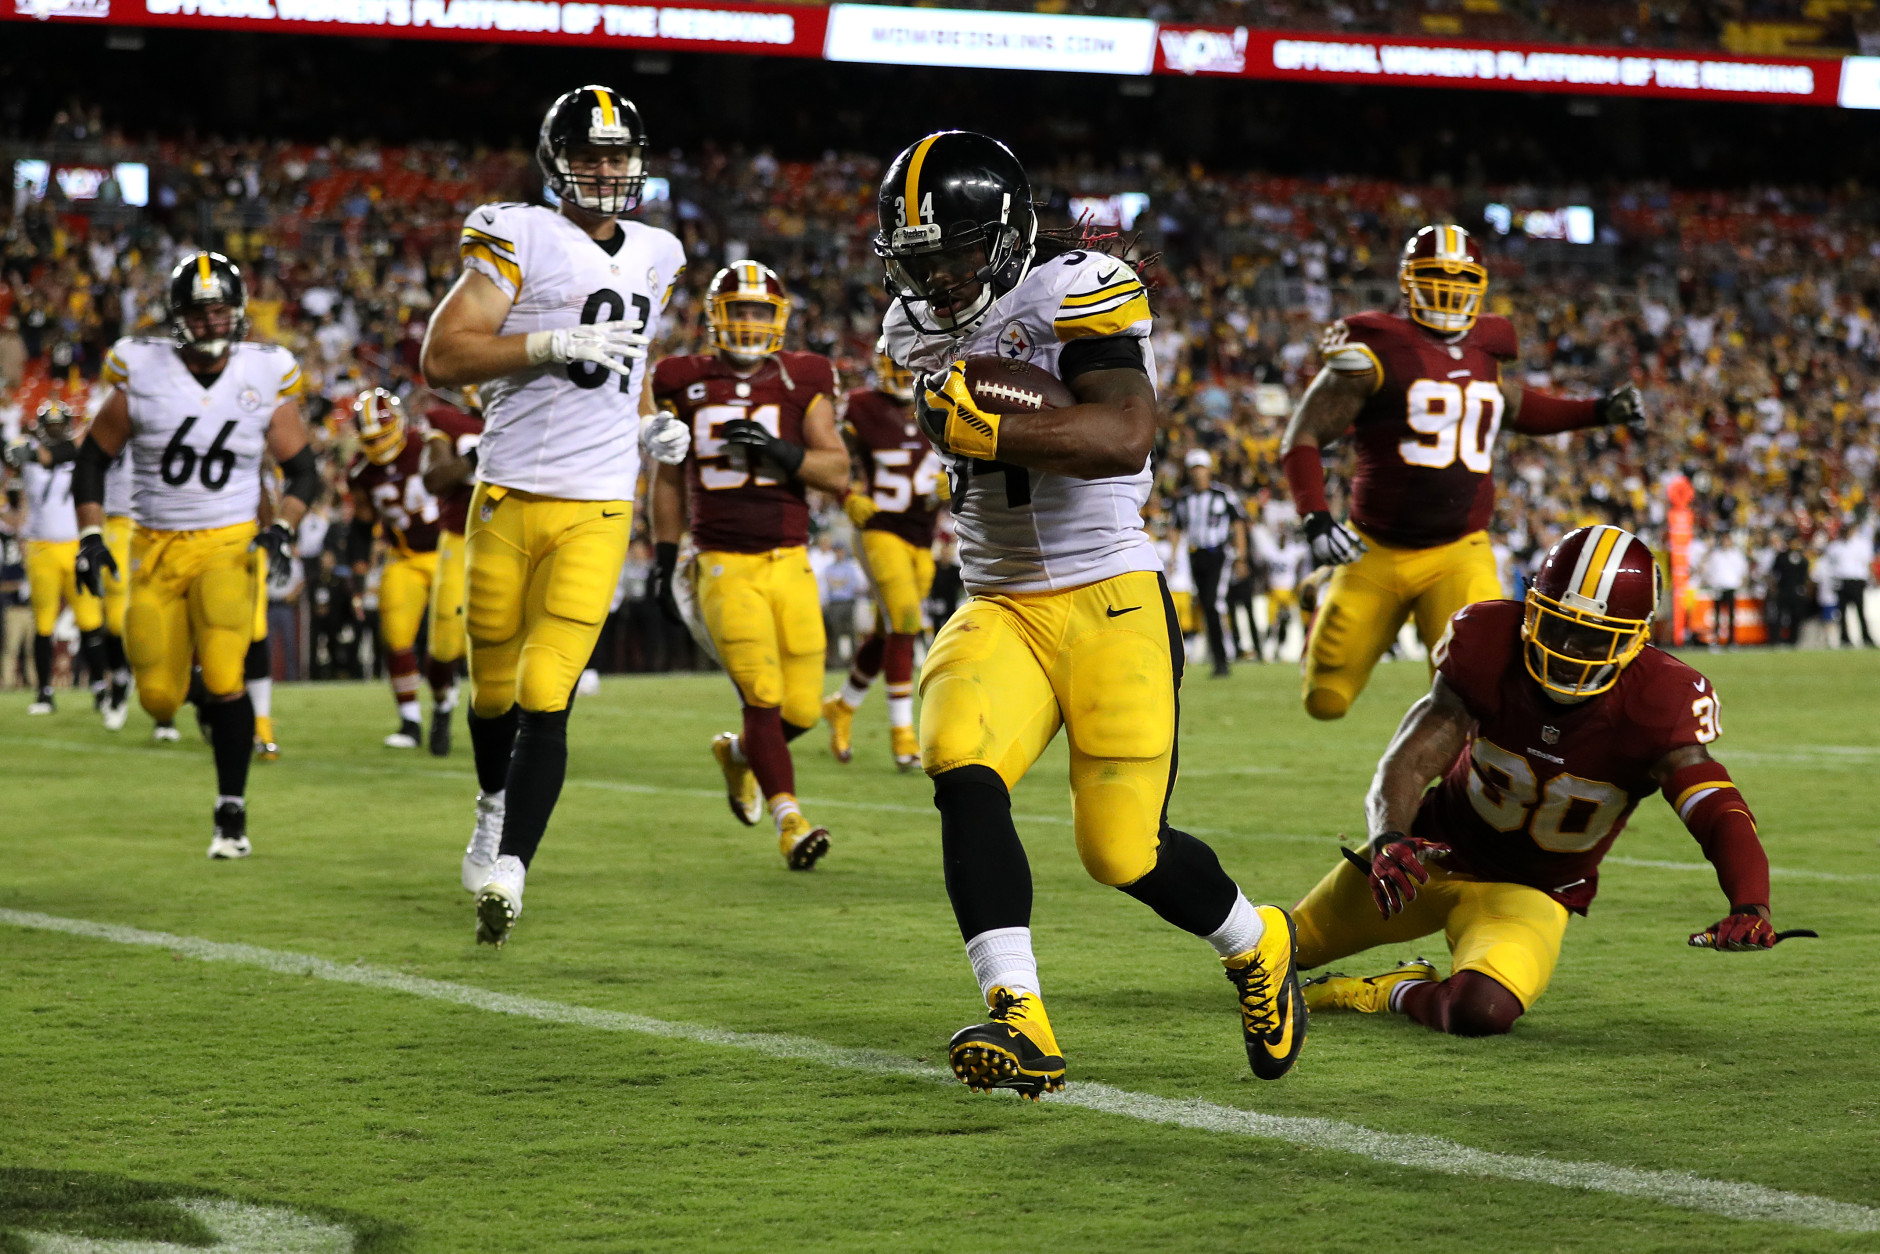 LANDOVER, MD - SEPTEMBER 12: Running back DeAngelo Williams #34 of the Pittsburgh Steelers scores a fourth quarter touchdown past defensive back David Bruton #30 of the Washington Redskins at FedExField on September 12, 2016 in Landover, Maryland. (Photo by Patrick Smith/Getty Images)